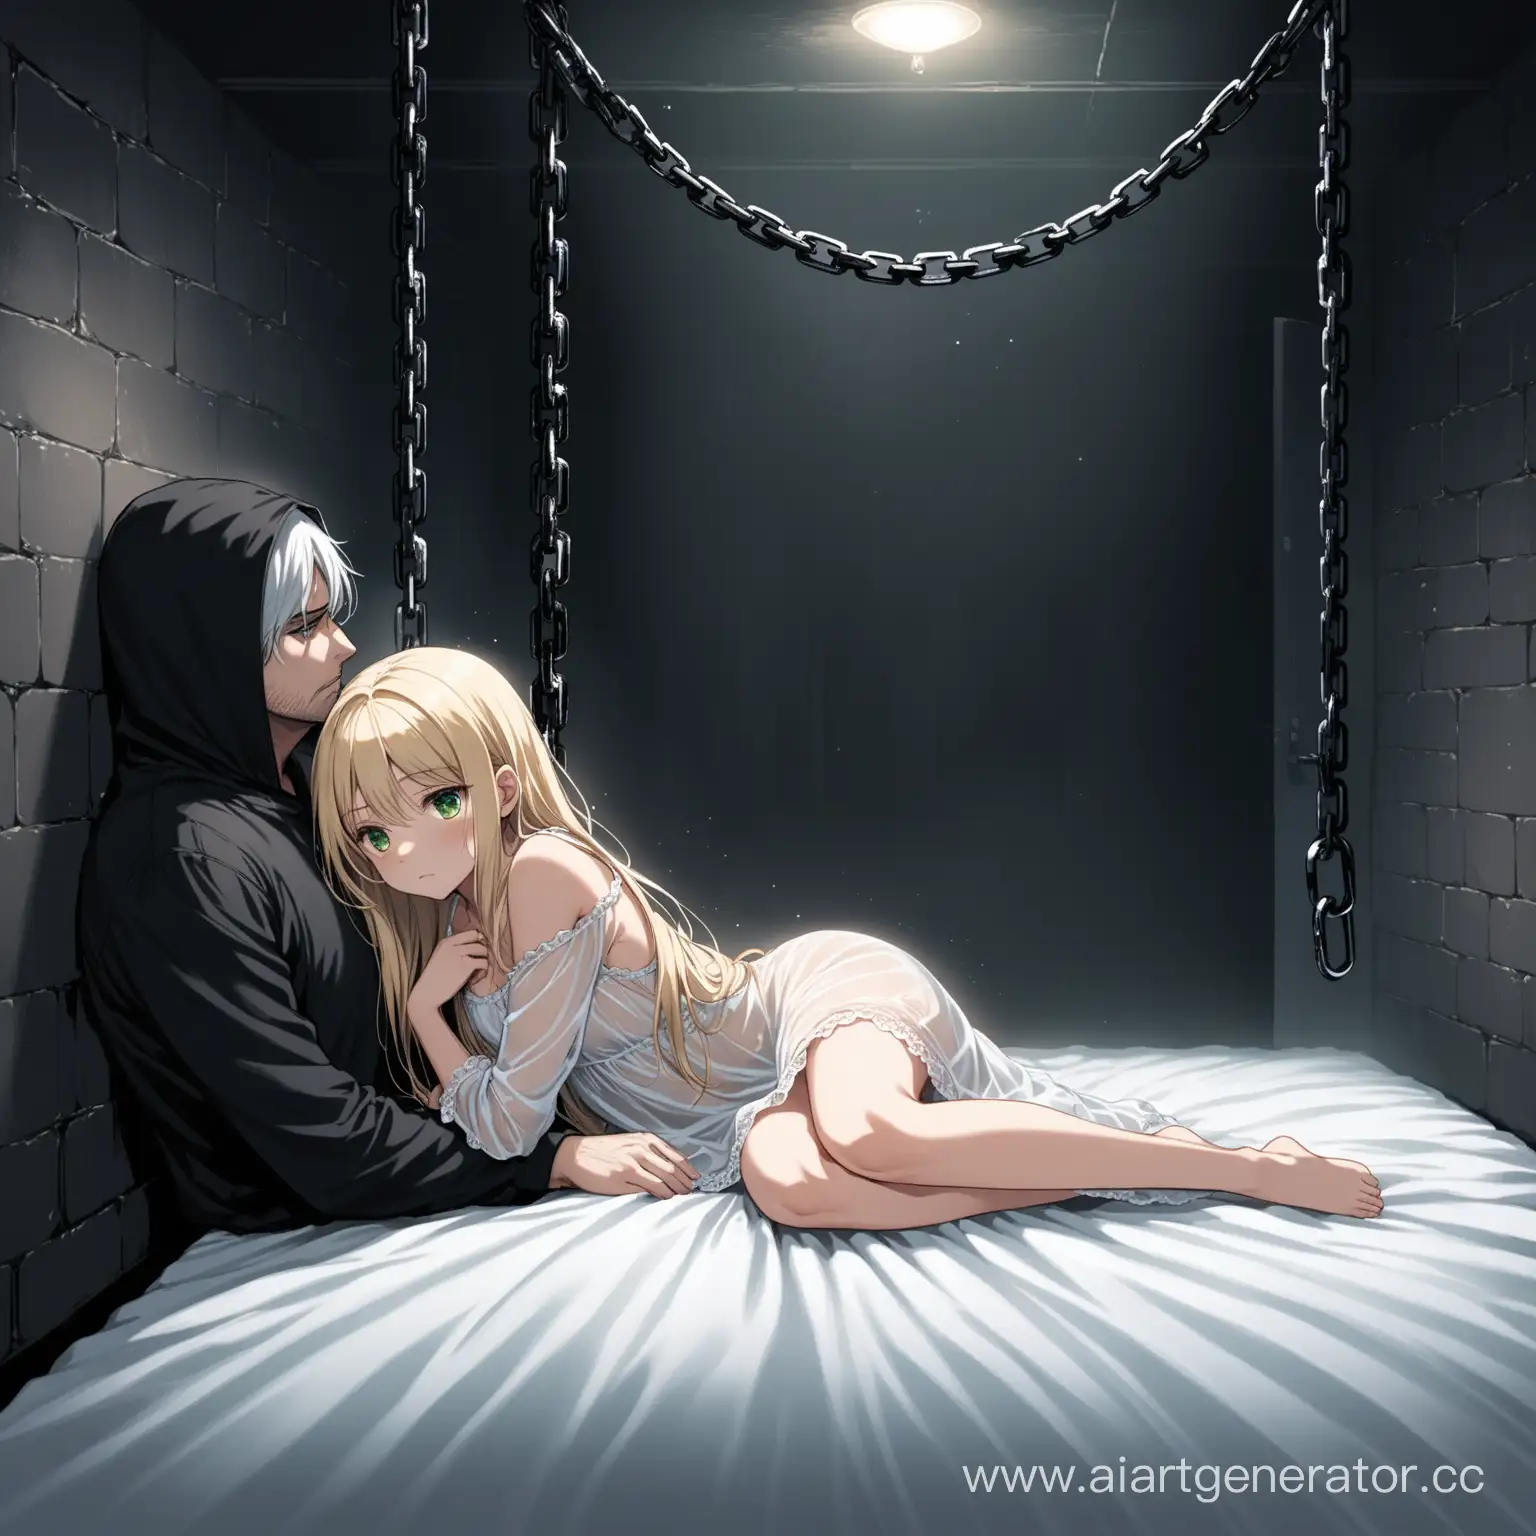 a short thin girl, blonde with long hair, green eyes, she is wearing a semi-transparent short nightgown, she is lying on a white mattress in the basement, and her leg is attached by a chain to the wall, she looks sad and detached, A very tall guy with short white hair and black eyes in black clothes is looking down at her, a dark atmosphere